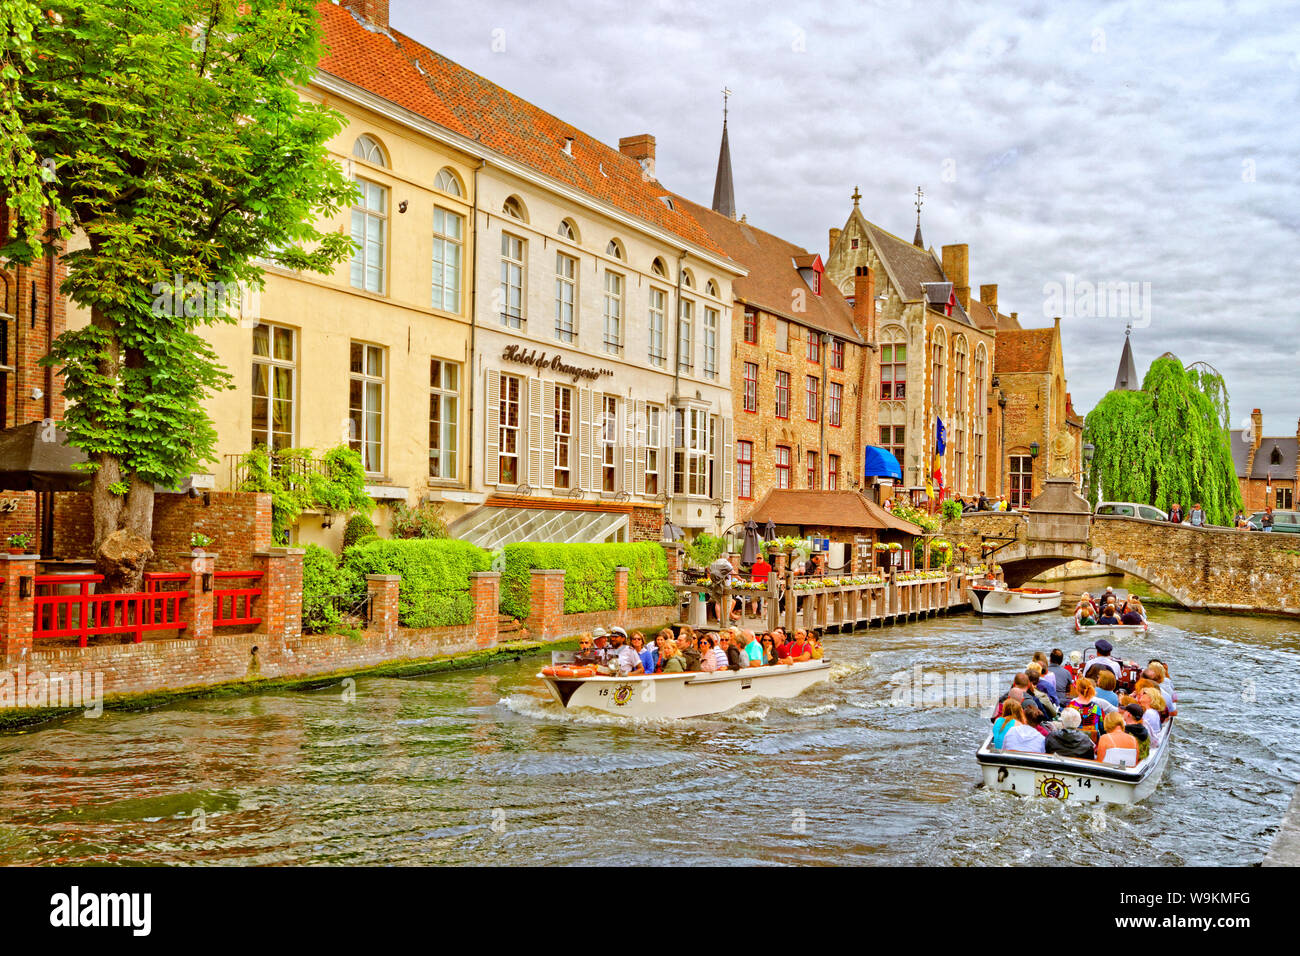 Tourist boats on the canals of Bruges, Belgium. Stock Photo